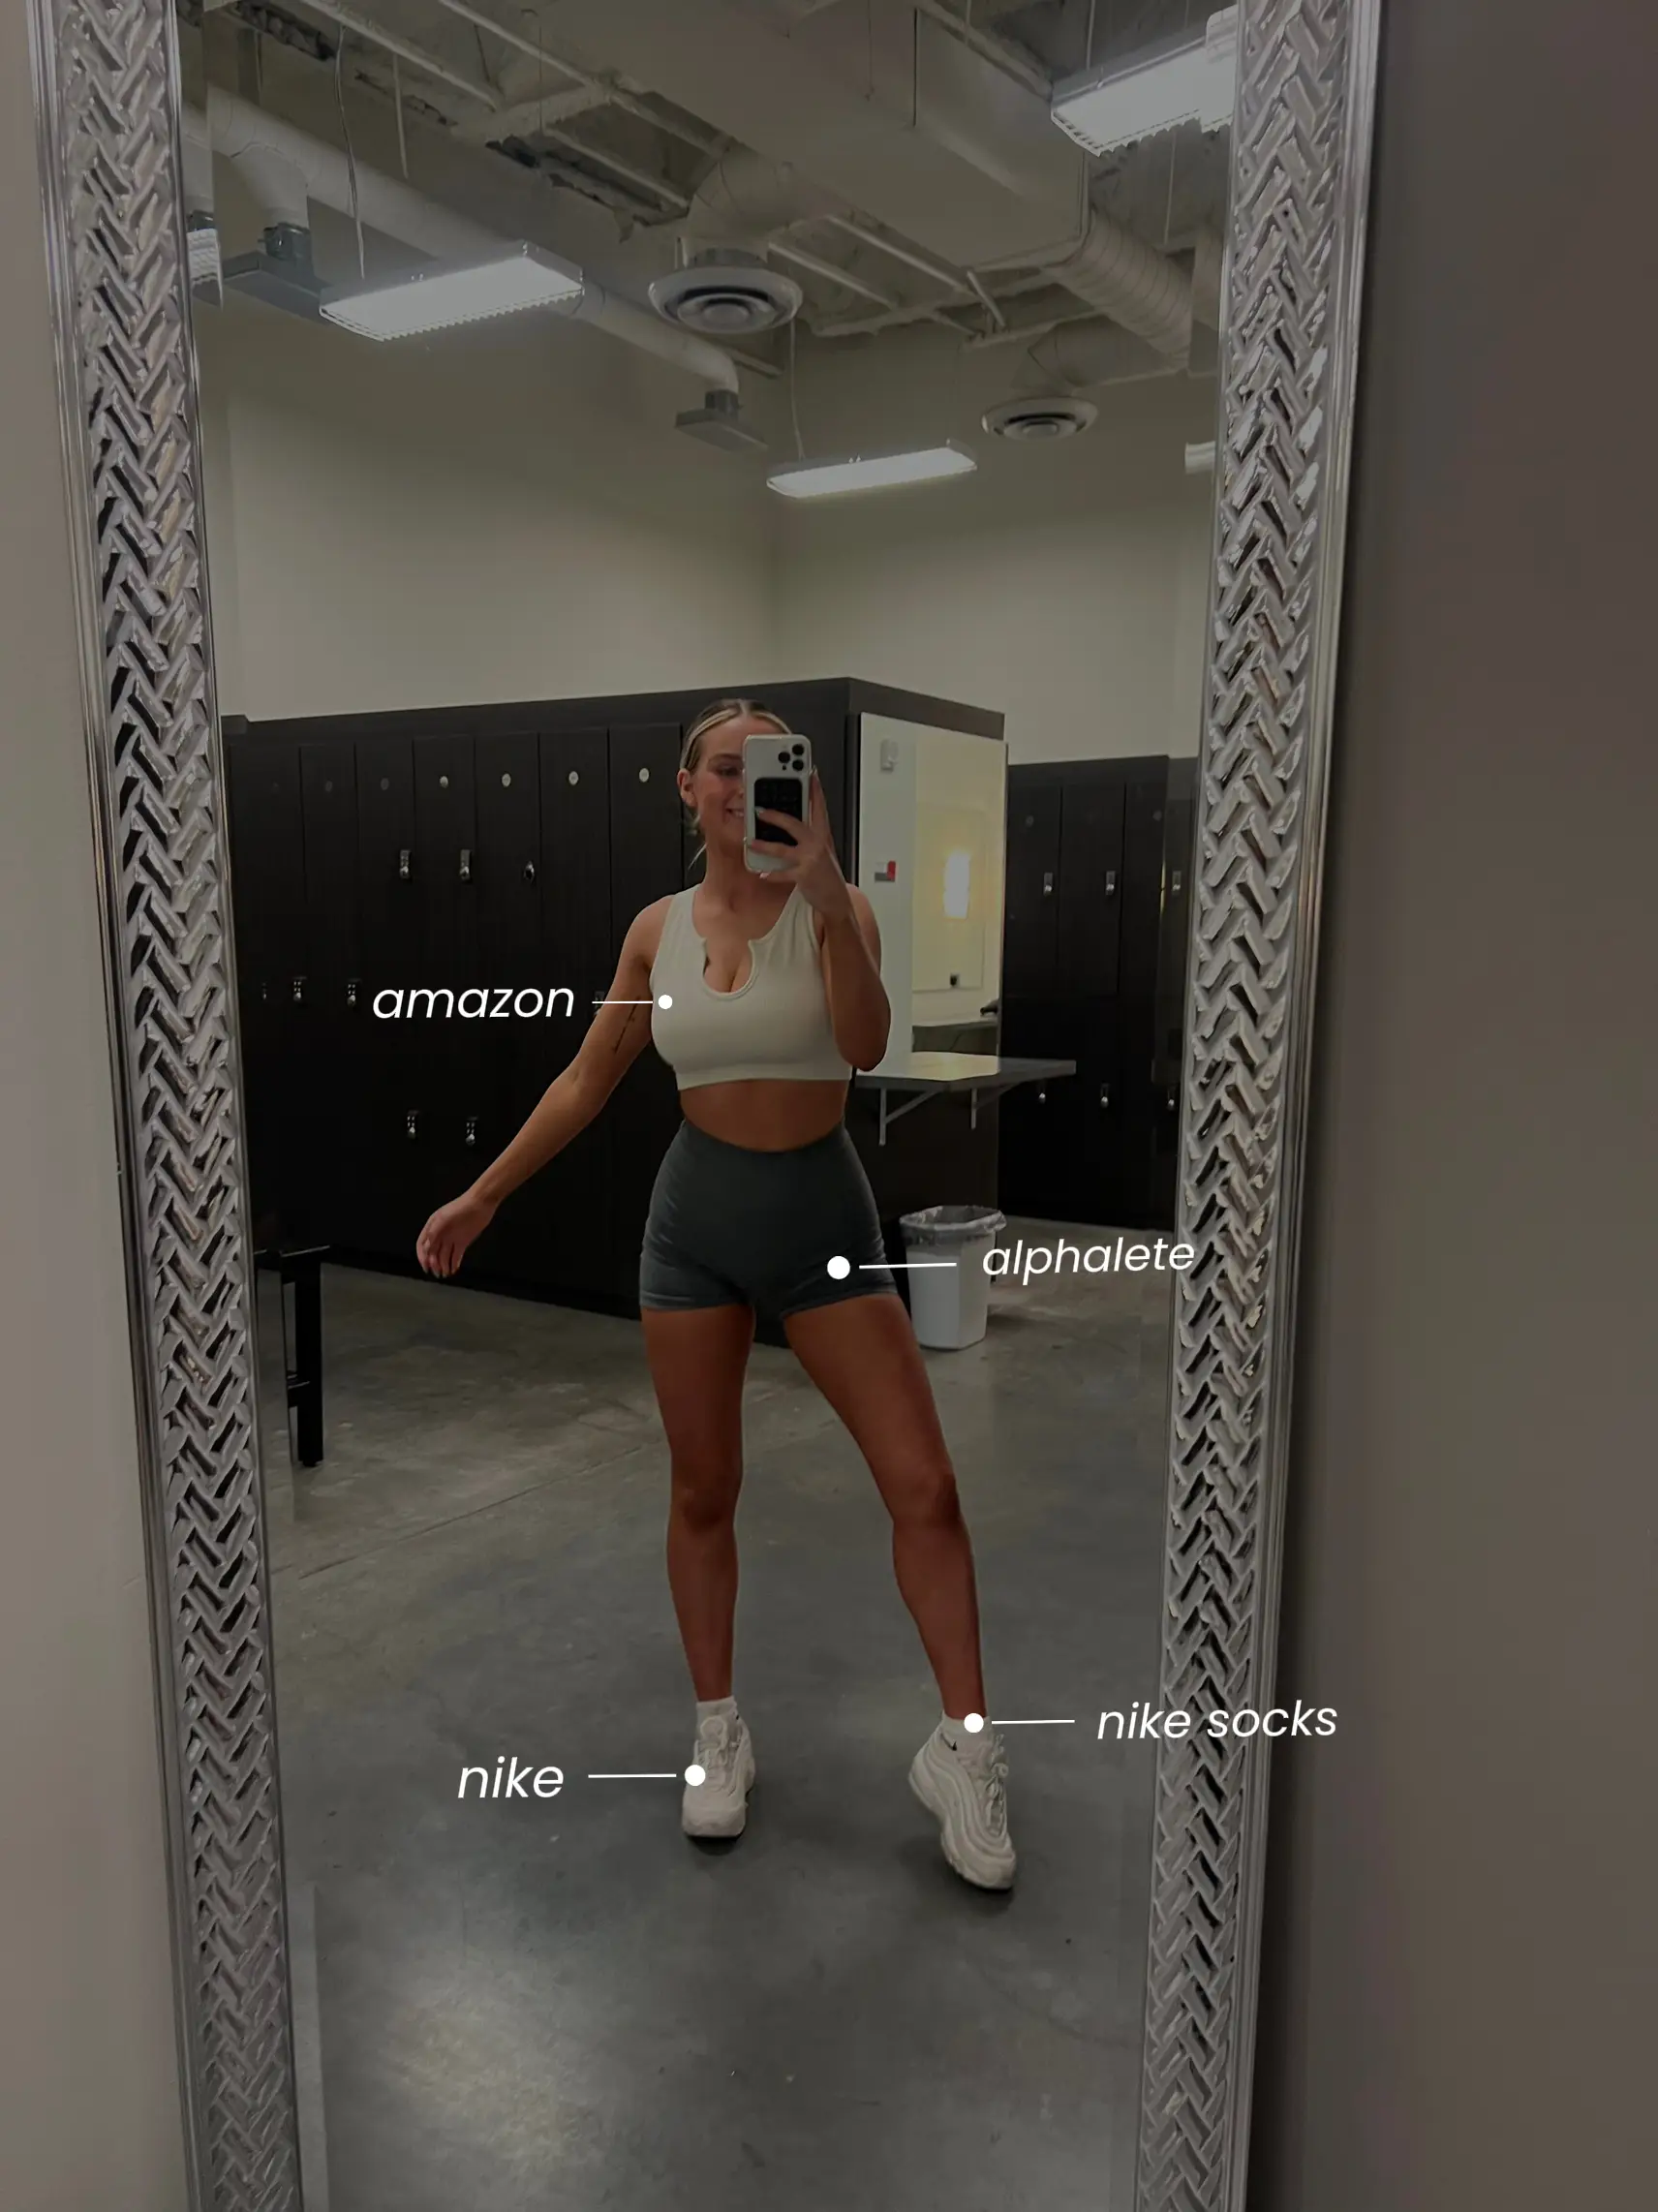 gym fit inspo🥹, Gallery posted by kylensuttner